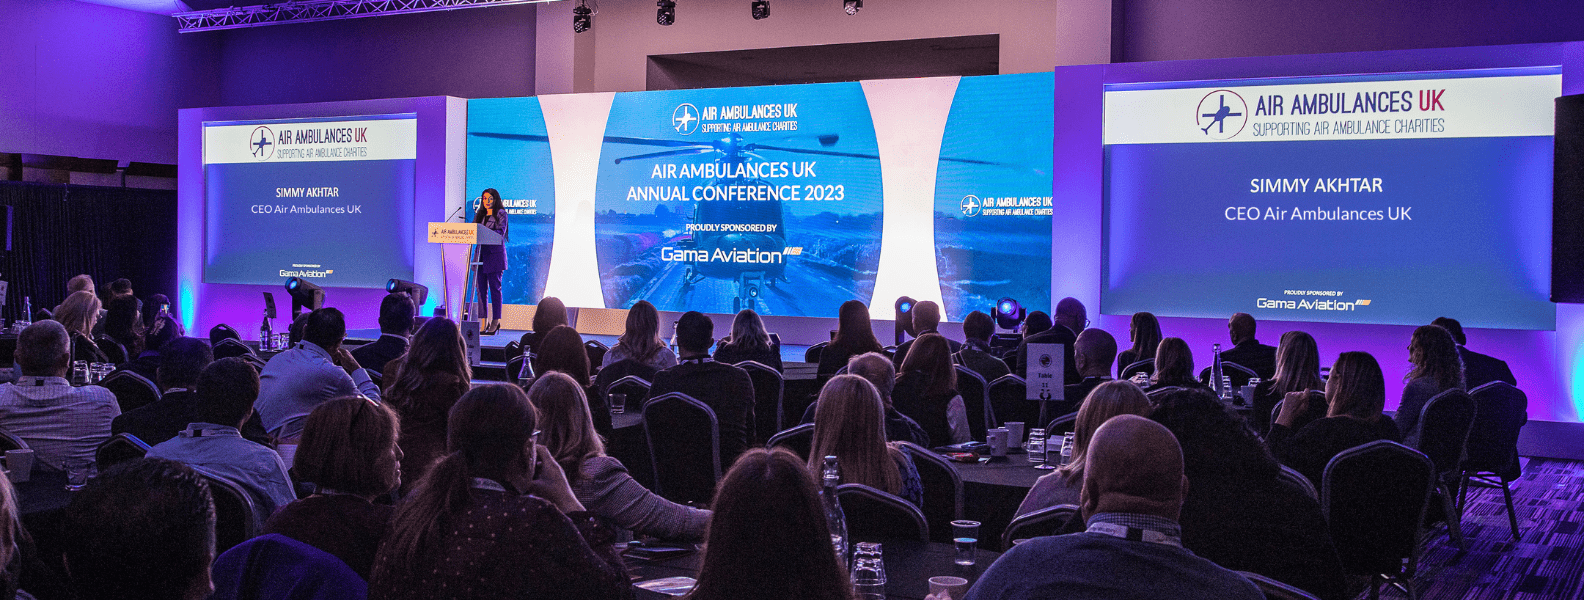 Simmy, AAUK CEO presenting at the 2023 Annual Conference